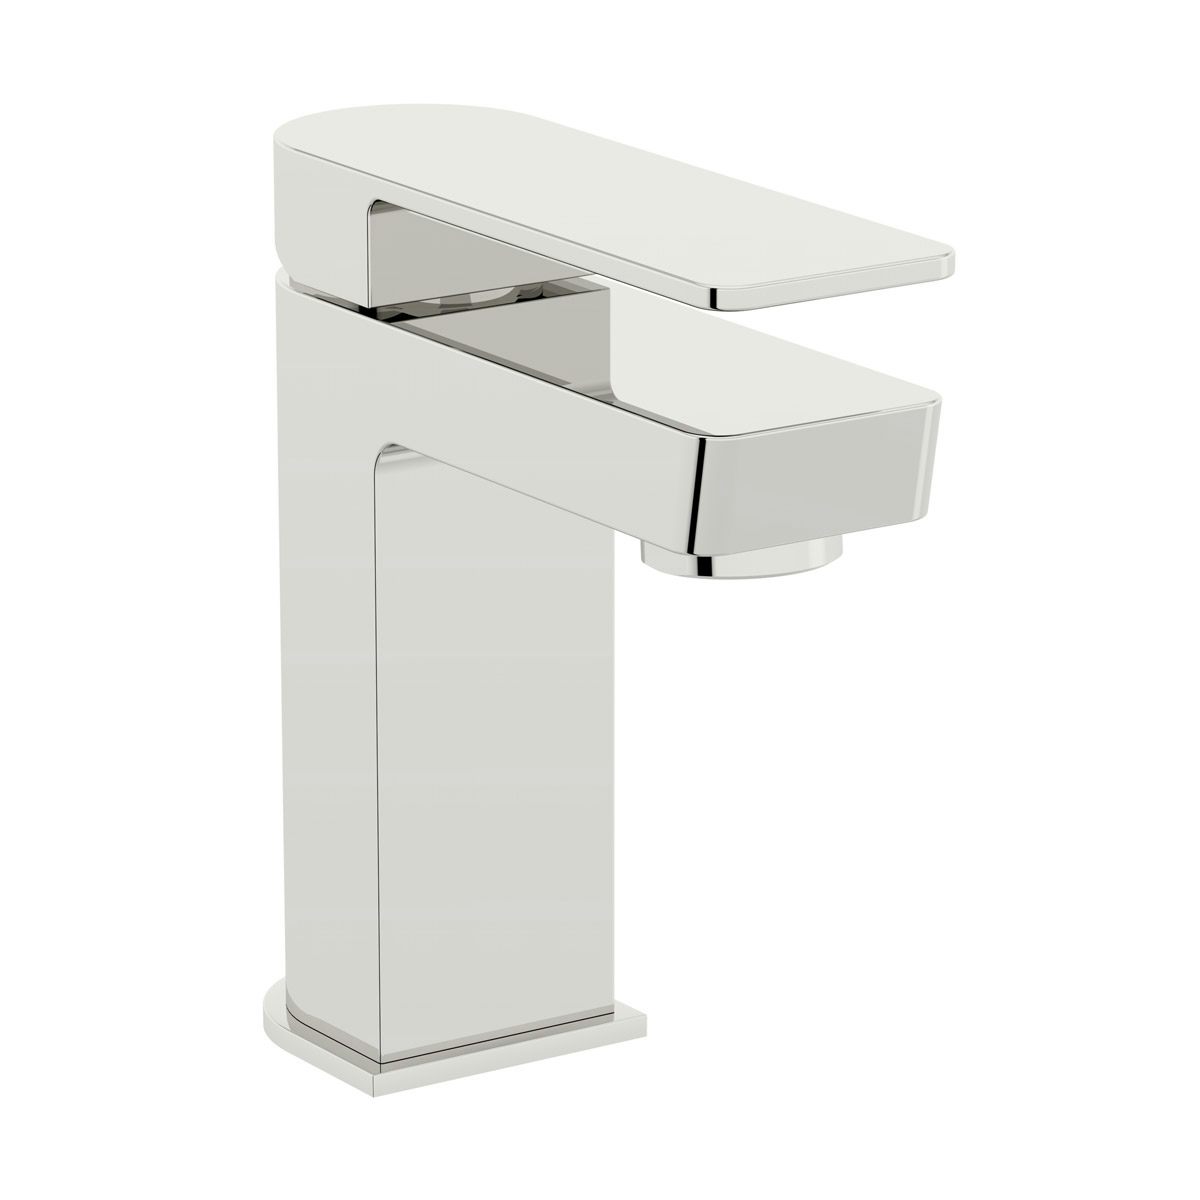 Mode Ellis cloakroom basin mixer tap with slotted waste